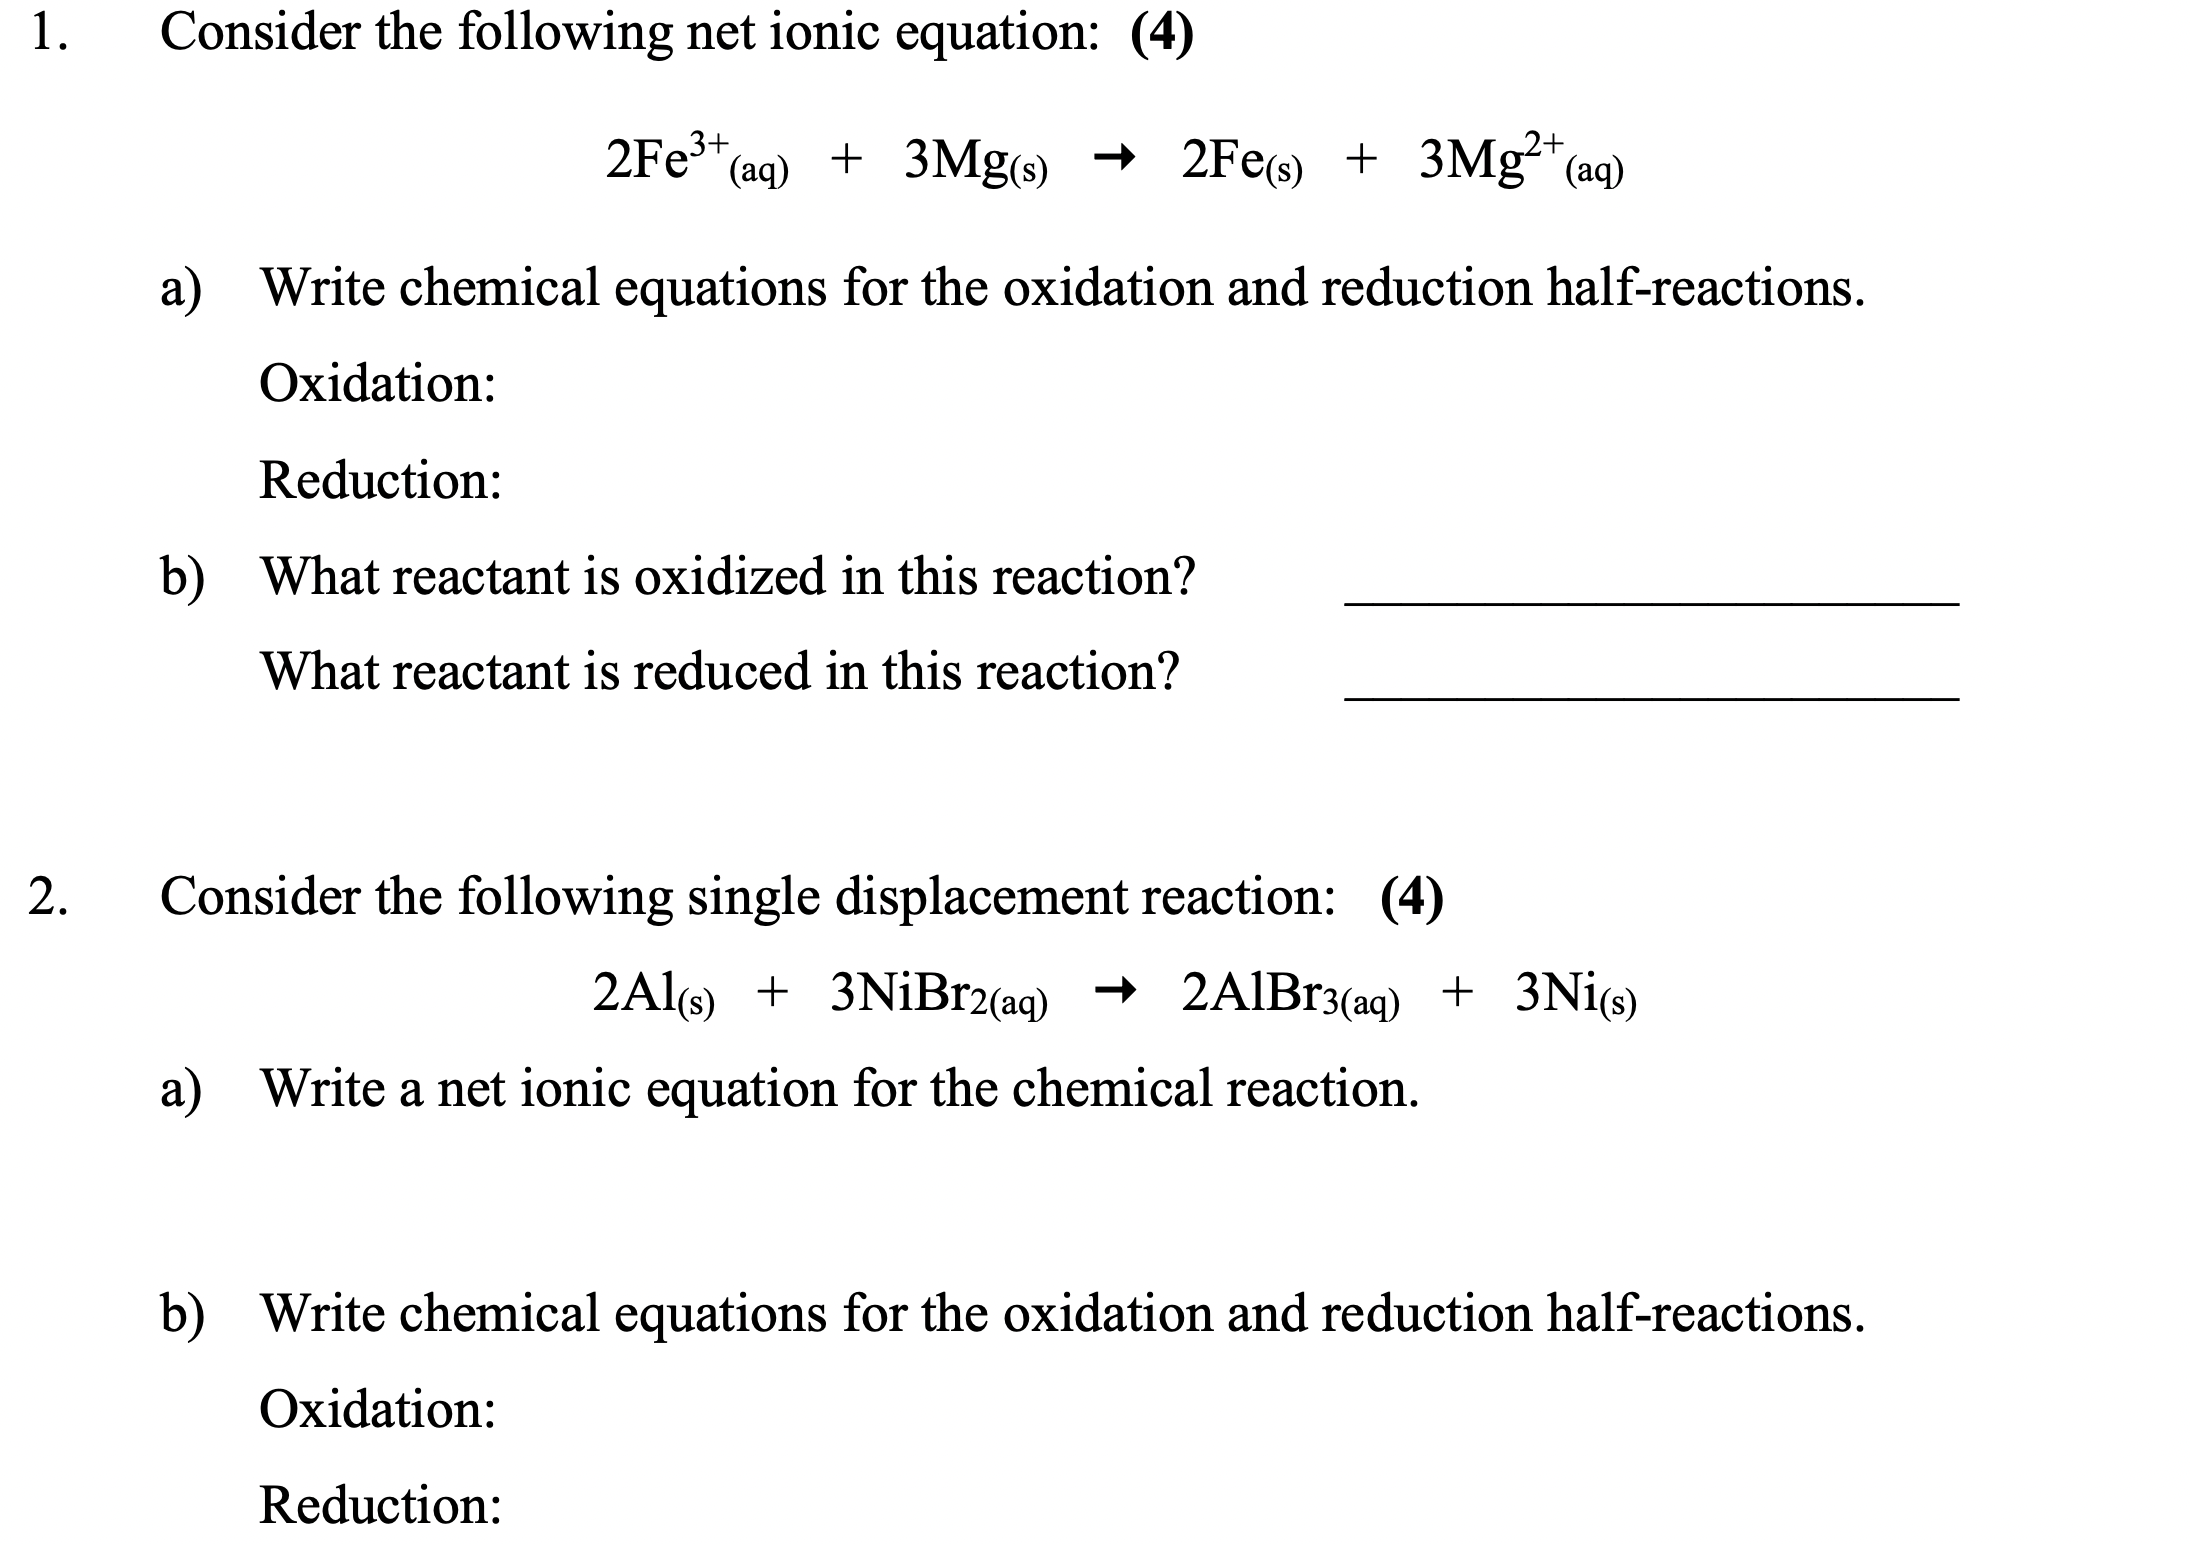 Writing half-reactions (ionic equations and net ionic equations